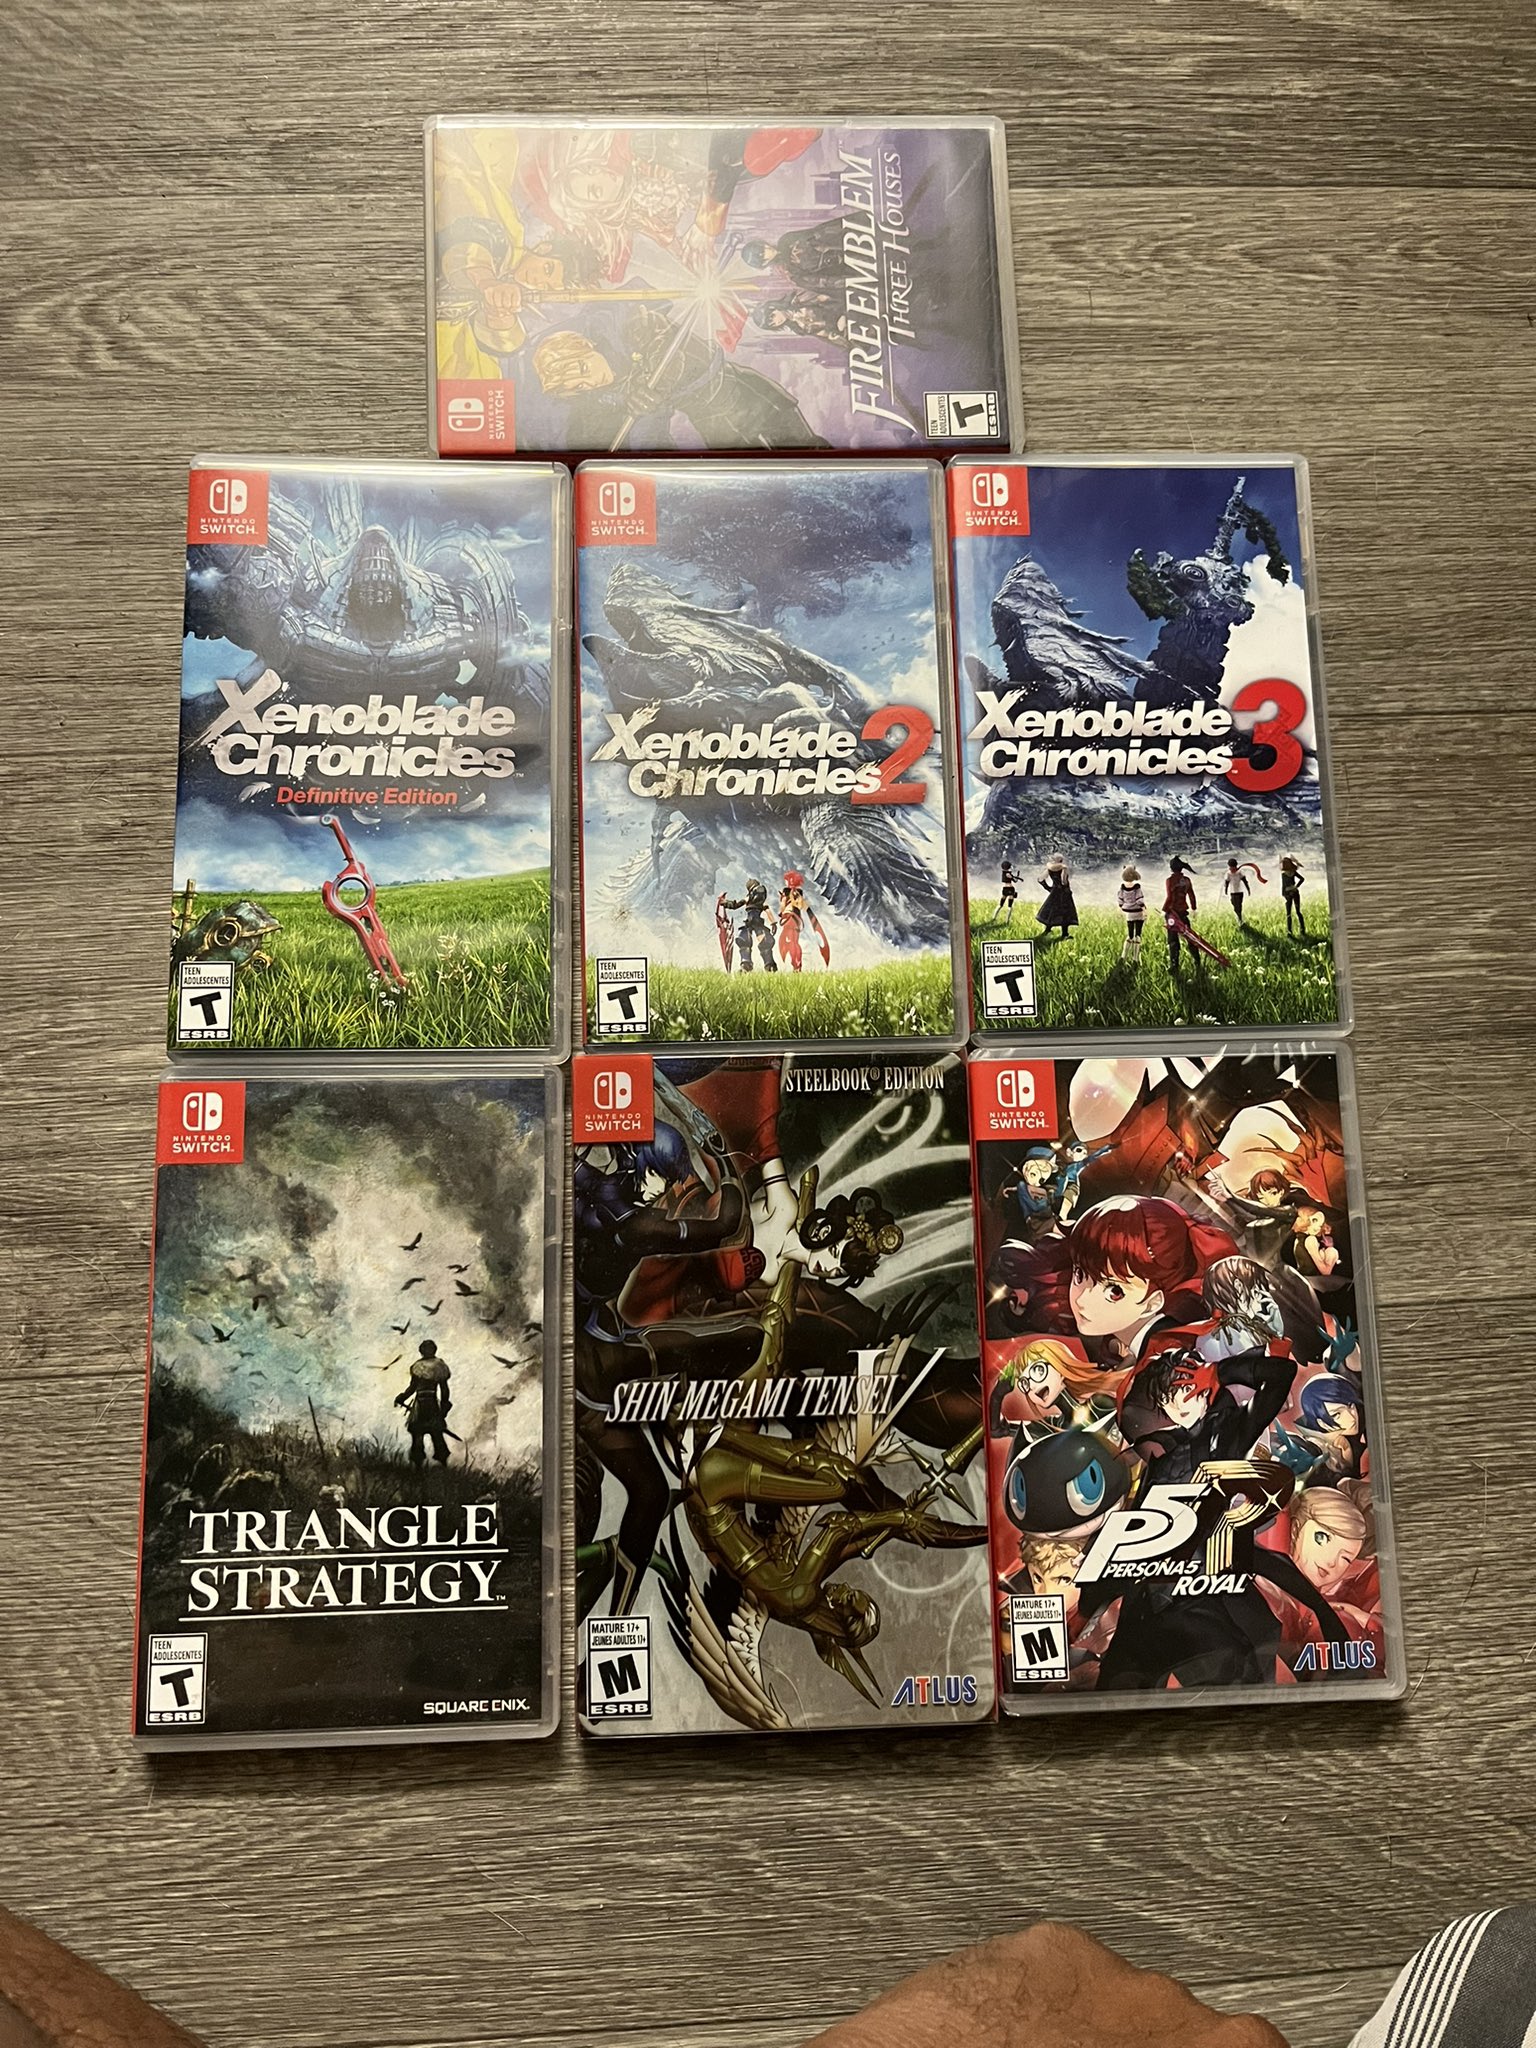 Kennedy Clark on "No way you love jrpgs and have a Nintendo switch. It's arguably the jrpg console of all time. https://t.co/TZiPdnUs0I" / Twitter